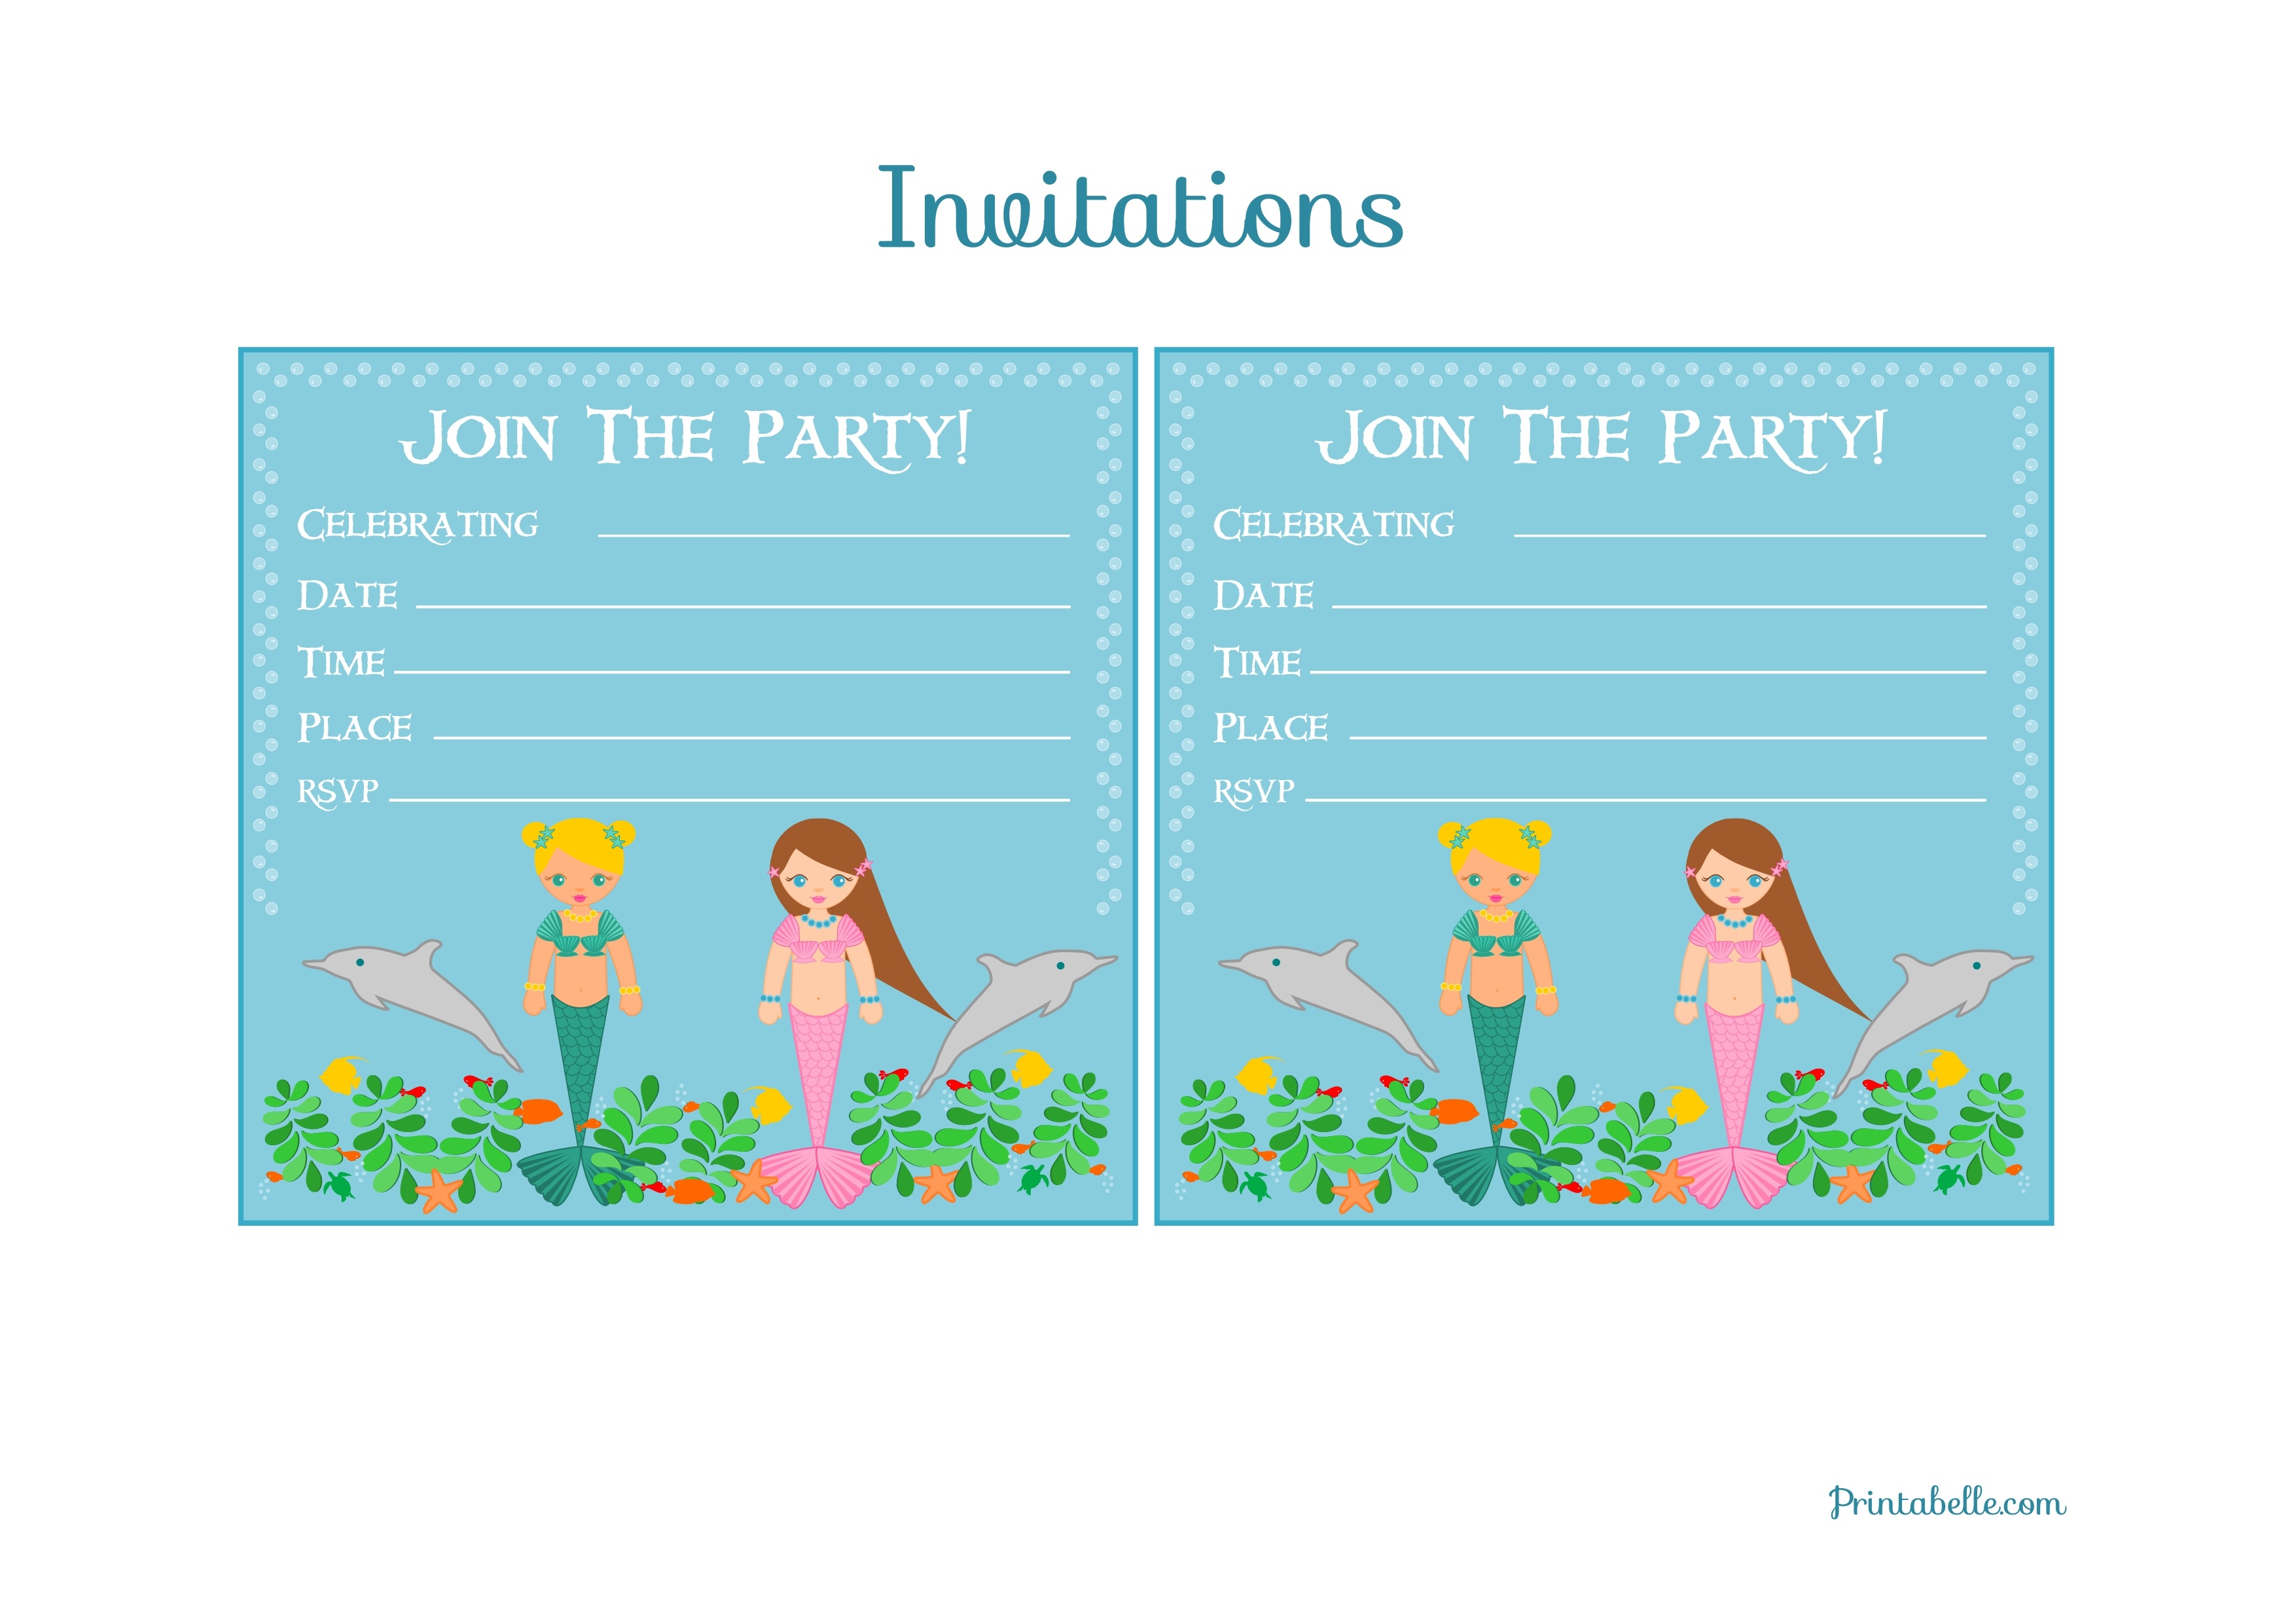 Free Mermaid Birthday Party Printables From Printabelle | Catch My Party - Mermaid Party Invitations Printable Free